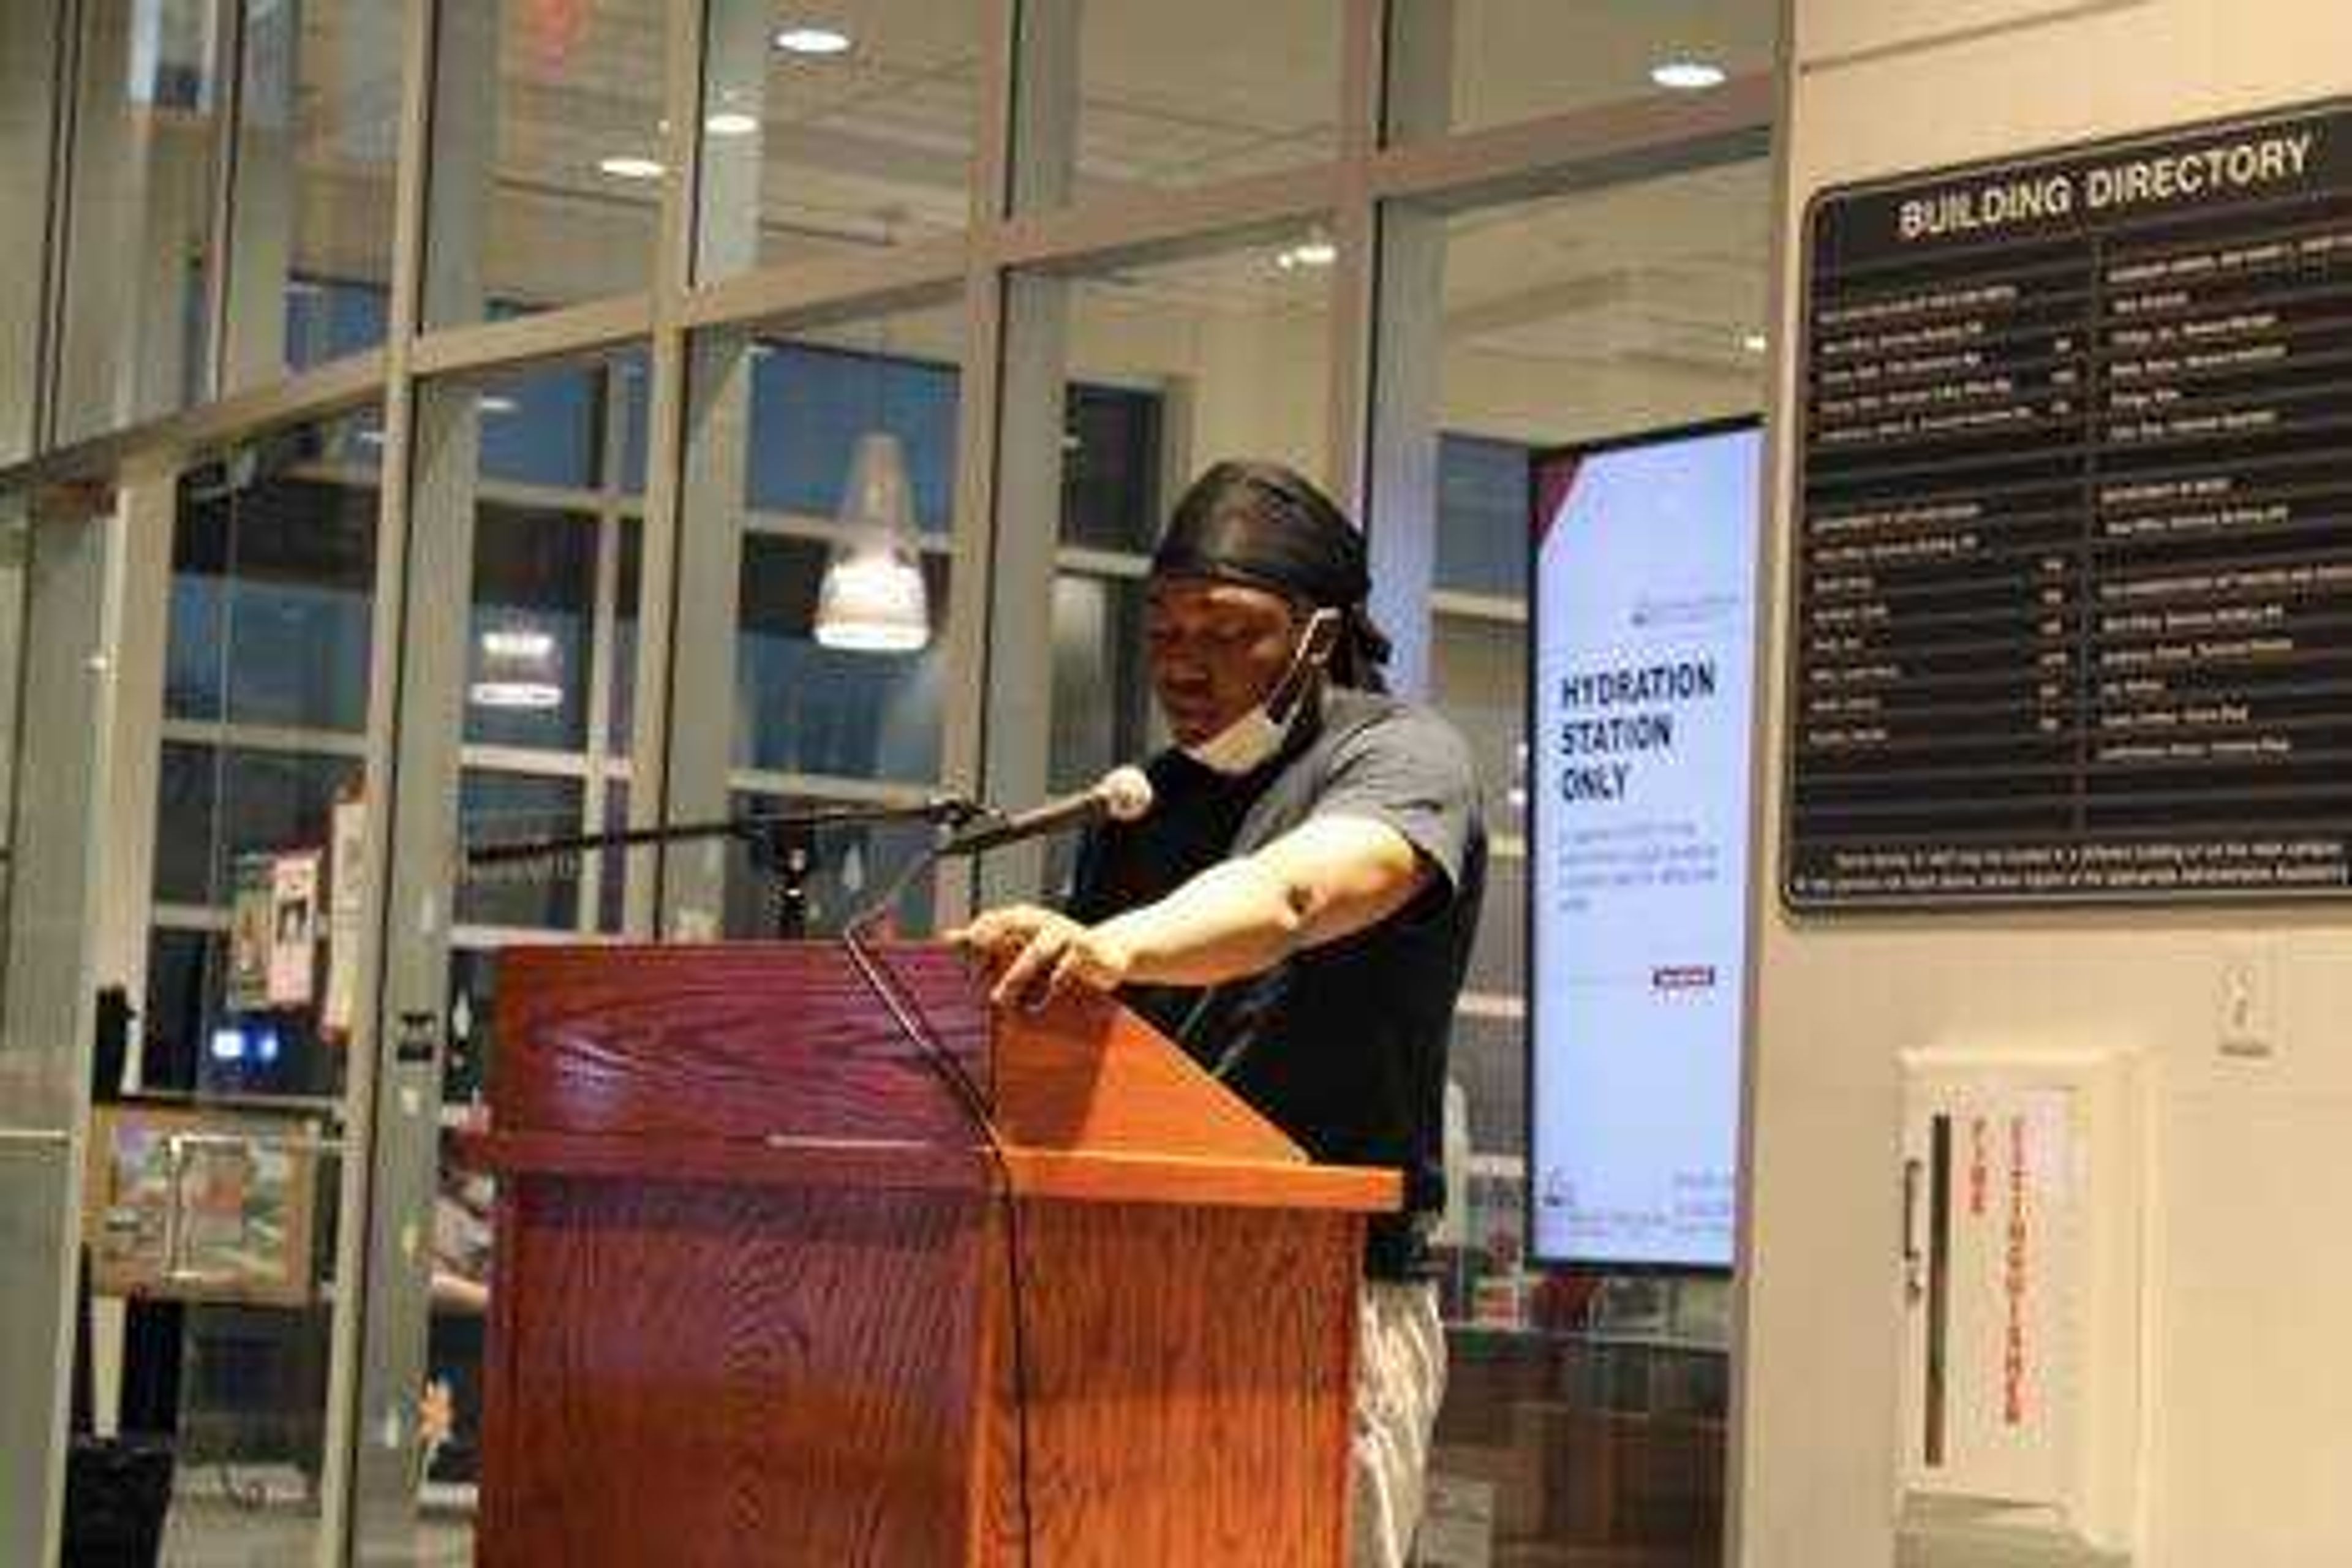 Junior Atum Miles reads “Am I a Monster?” a piece of poetry he wrote about his own life. Miles read this poem for students and community members at the annual Open Mic Poetry Night in the lobby next to the Crisp Museum at River campus.